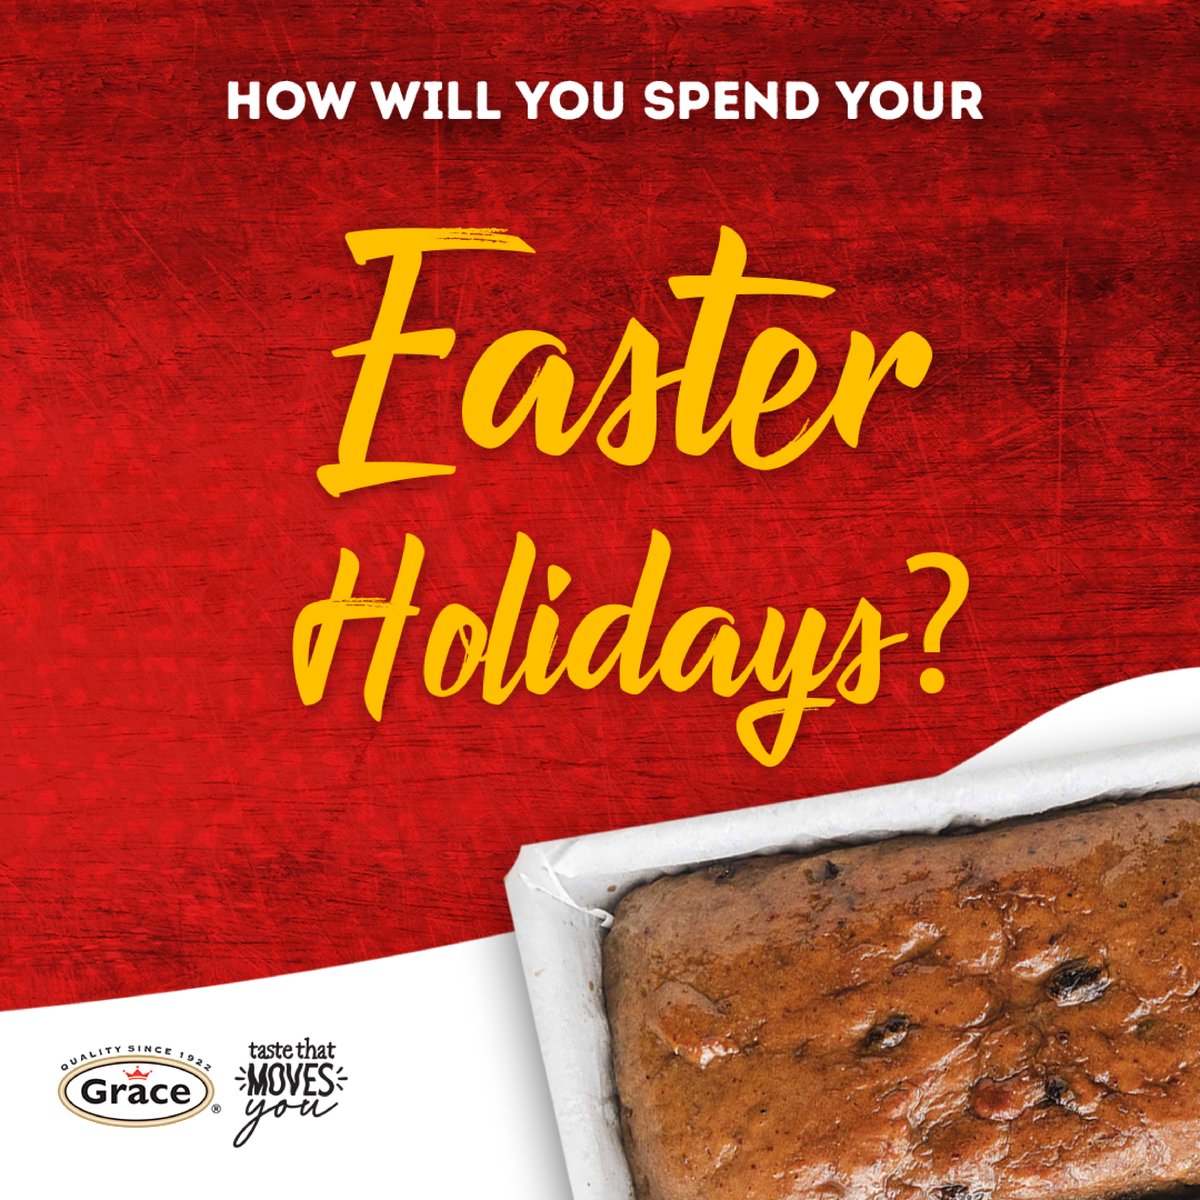 We'd love to know how you intend to spend your holiday! Tell us in the comments below. 😃 #GraceFoods #TasteThatMovesYou #Easter #EasterHolidays